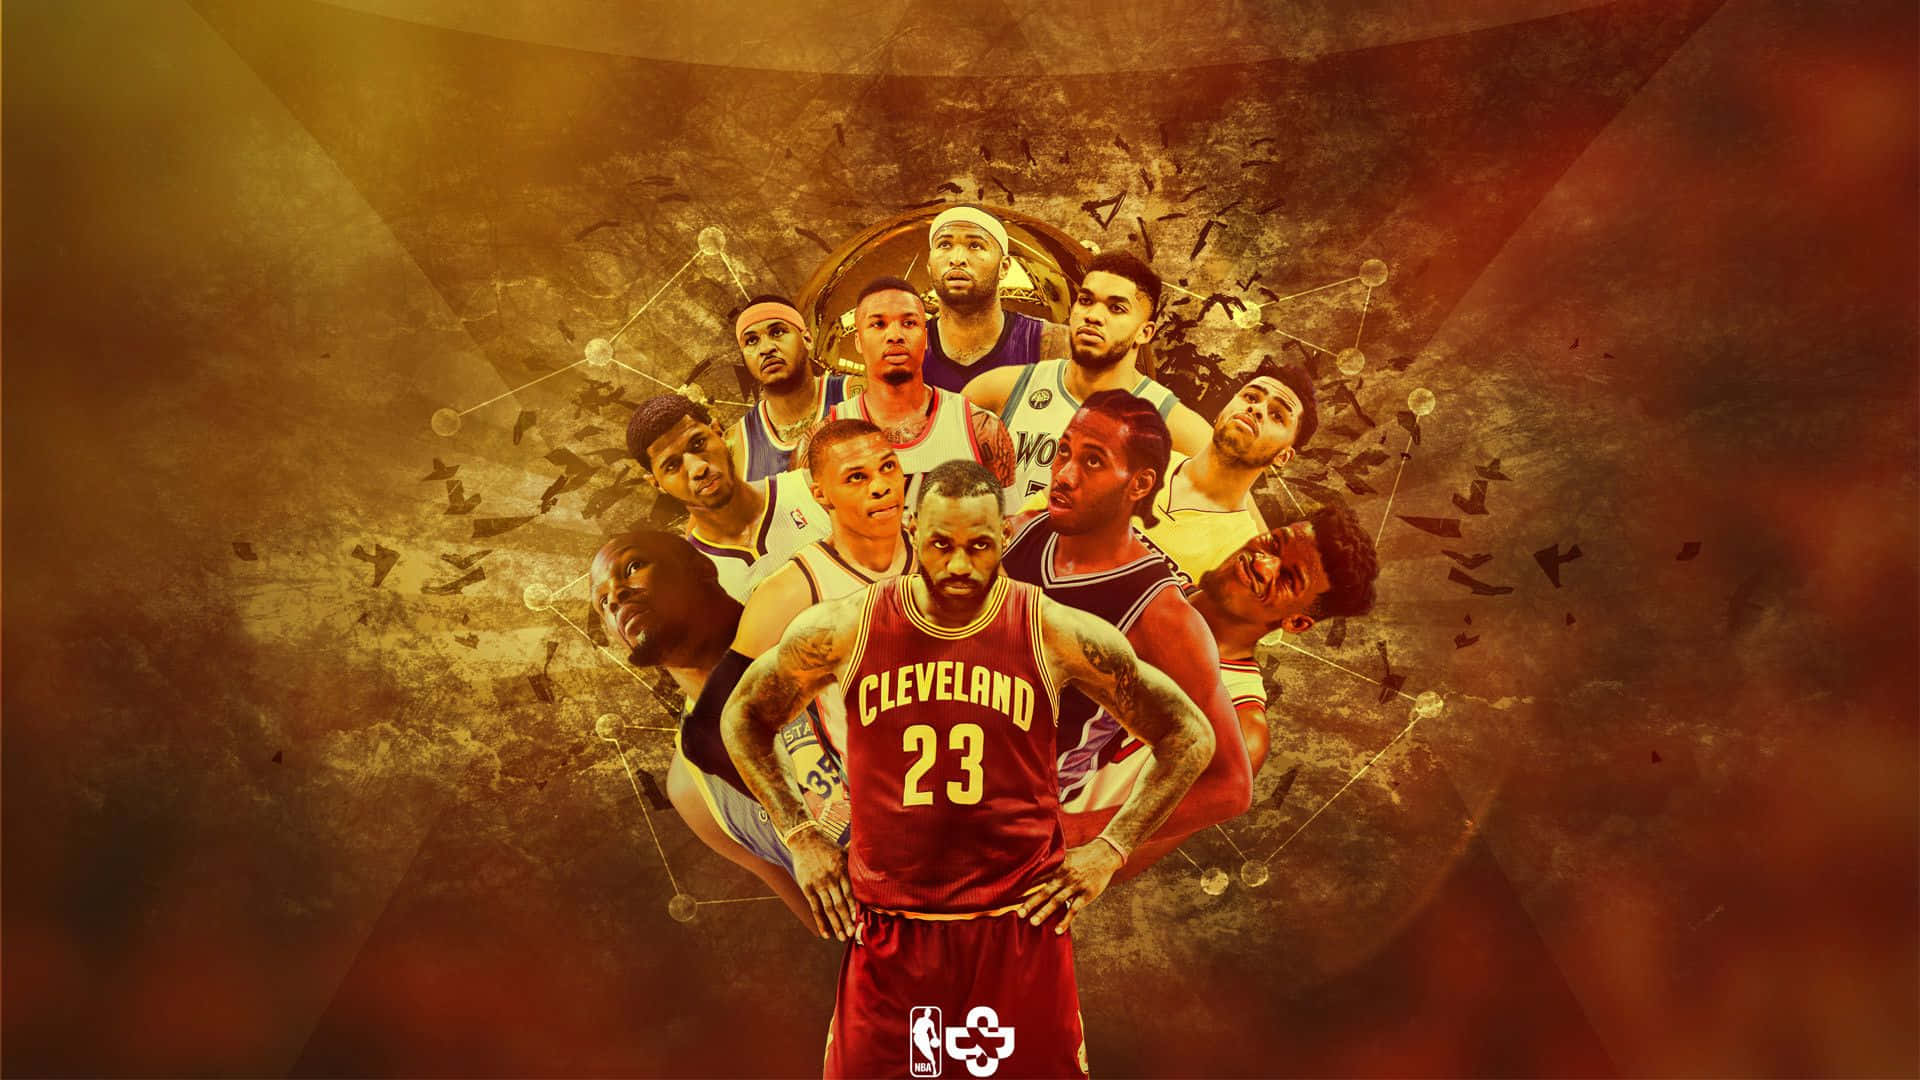 "Choose Your Player and take your chances on the court in 2K!" Wallpaper